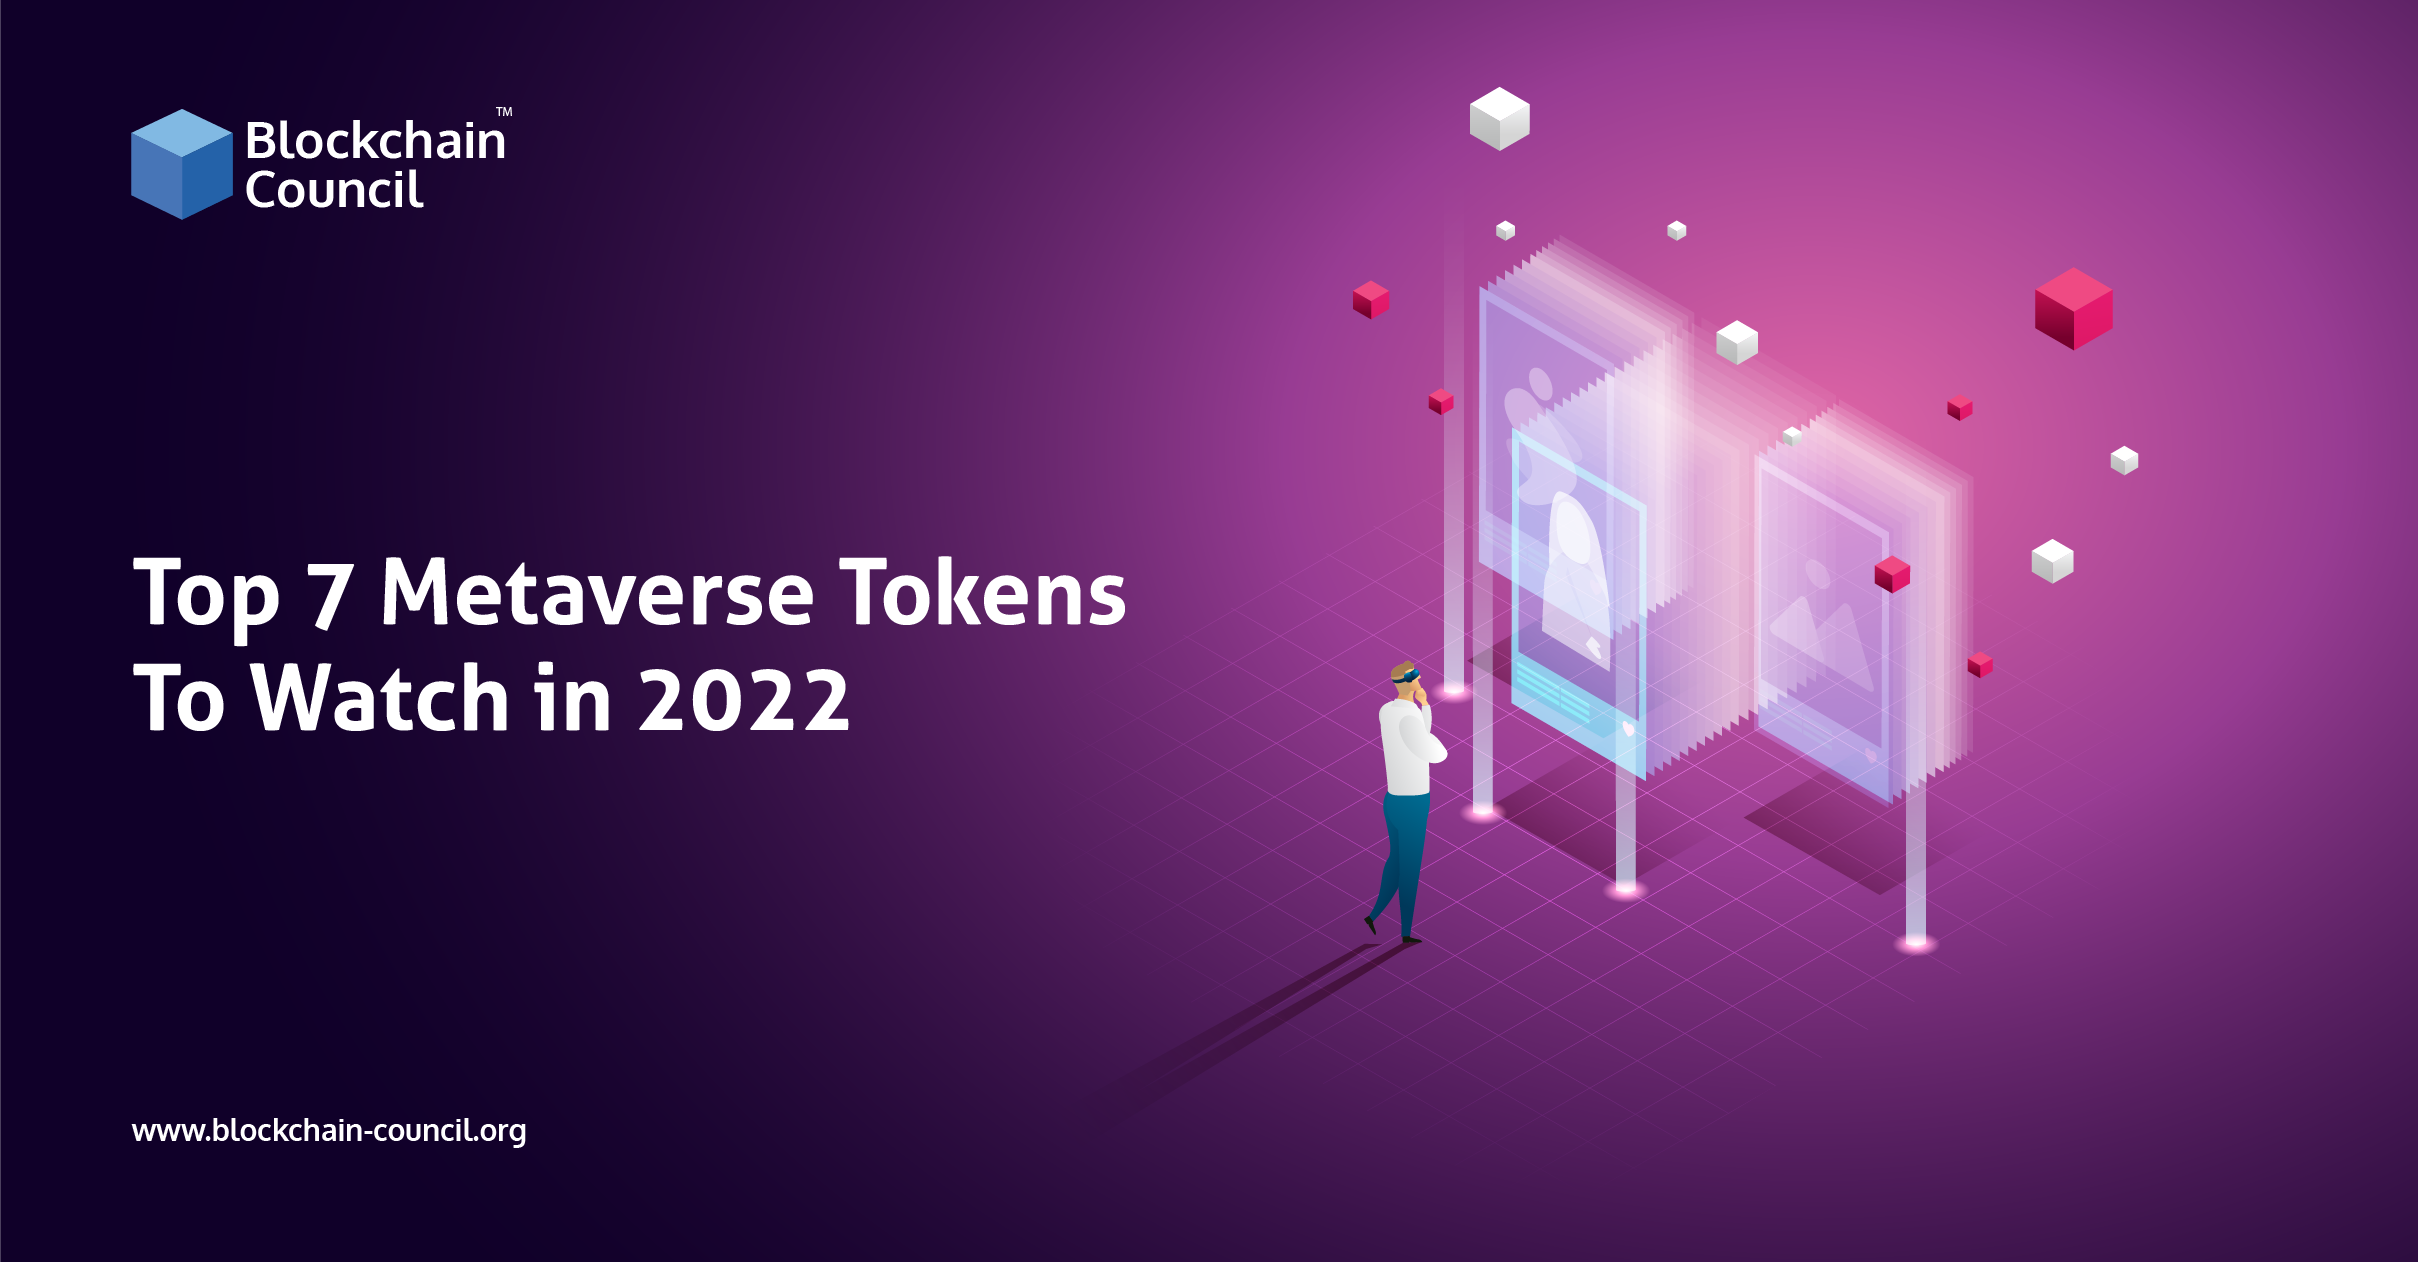 Top 7 Metaverse Tokens To Watch in 2022